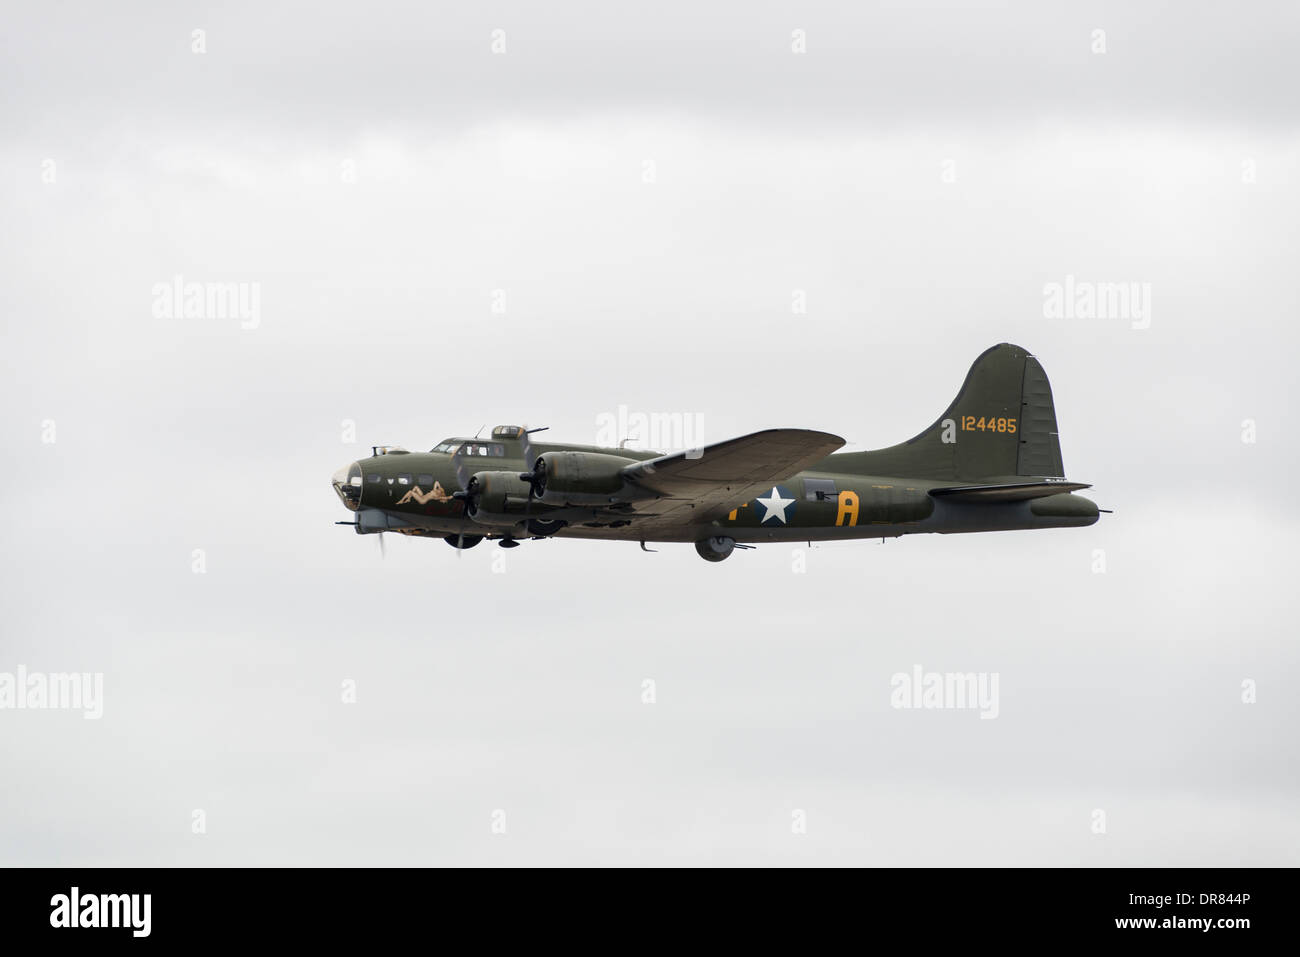 Iconic American World War Two Heavy Bomber Aircraft the B-17 named Sally B displays at 2013 Royal International Air Tattoo Stock Photo